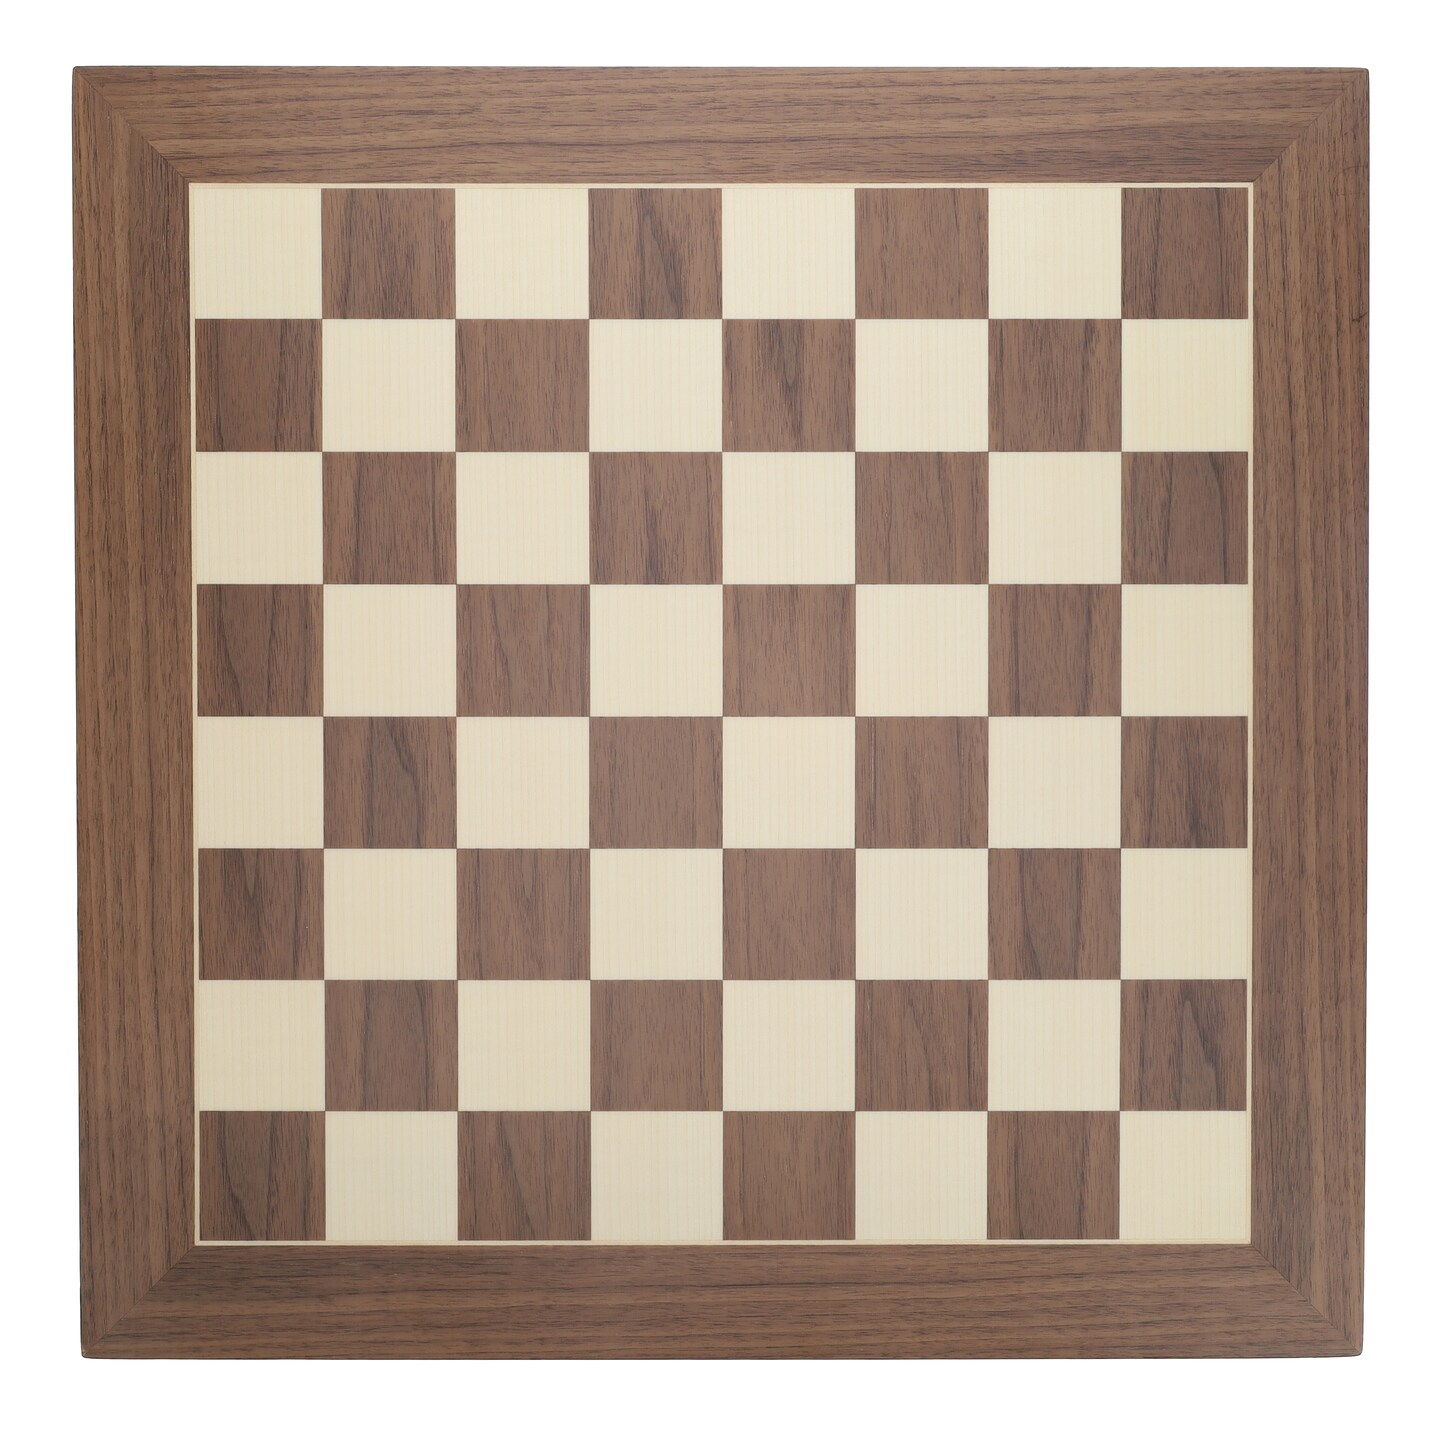 WE Games Deluxe Walnut and Sycamore Wooden Chess Board - 21.75 inches